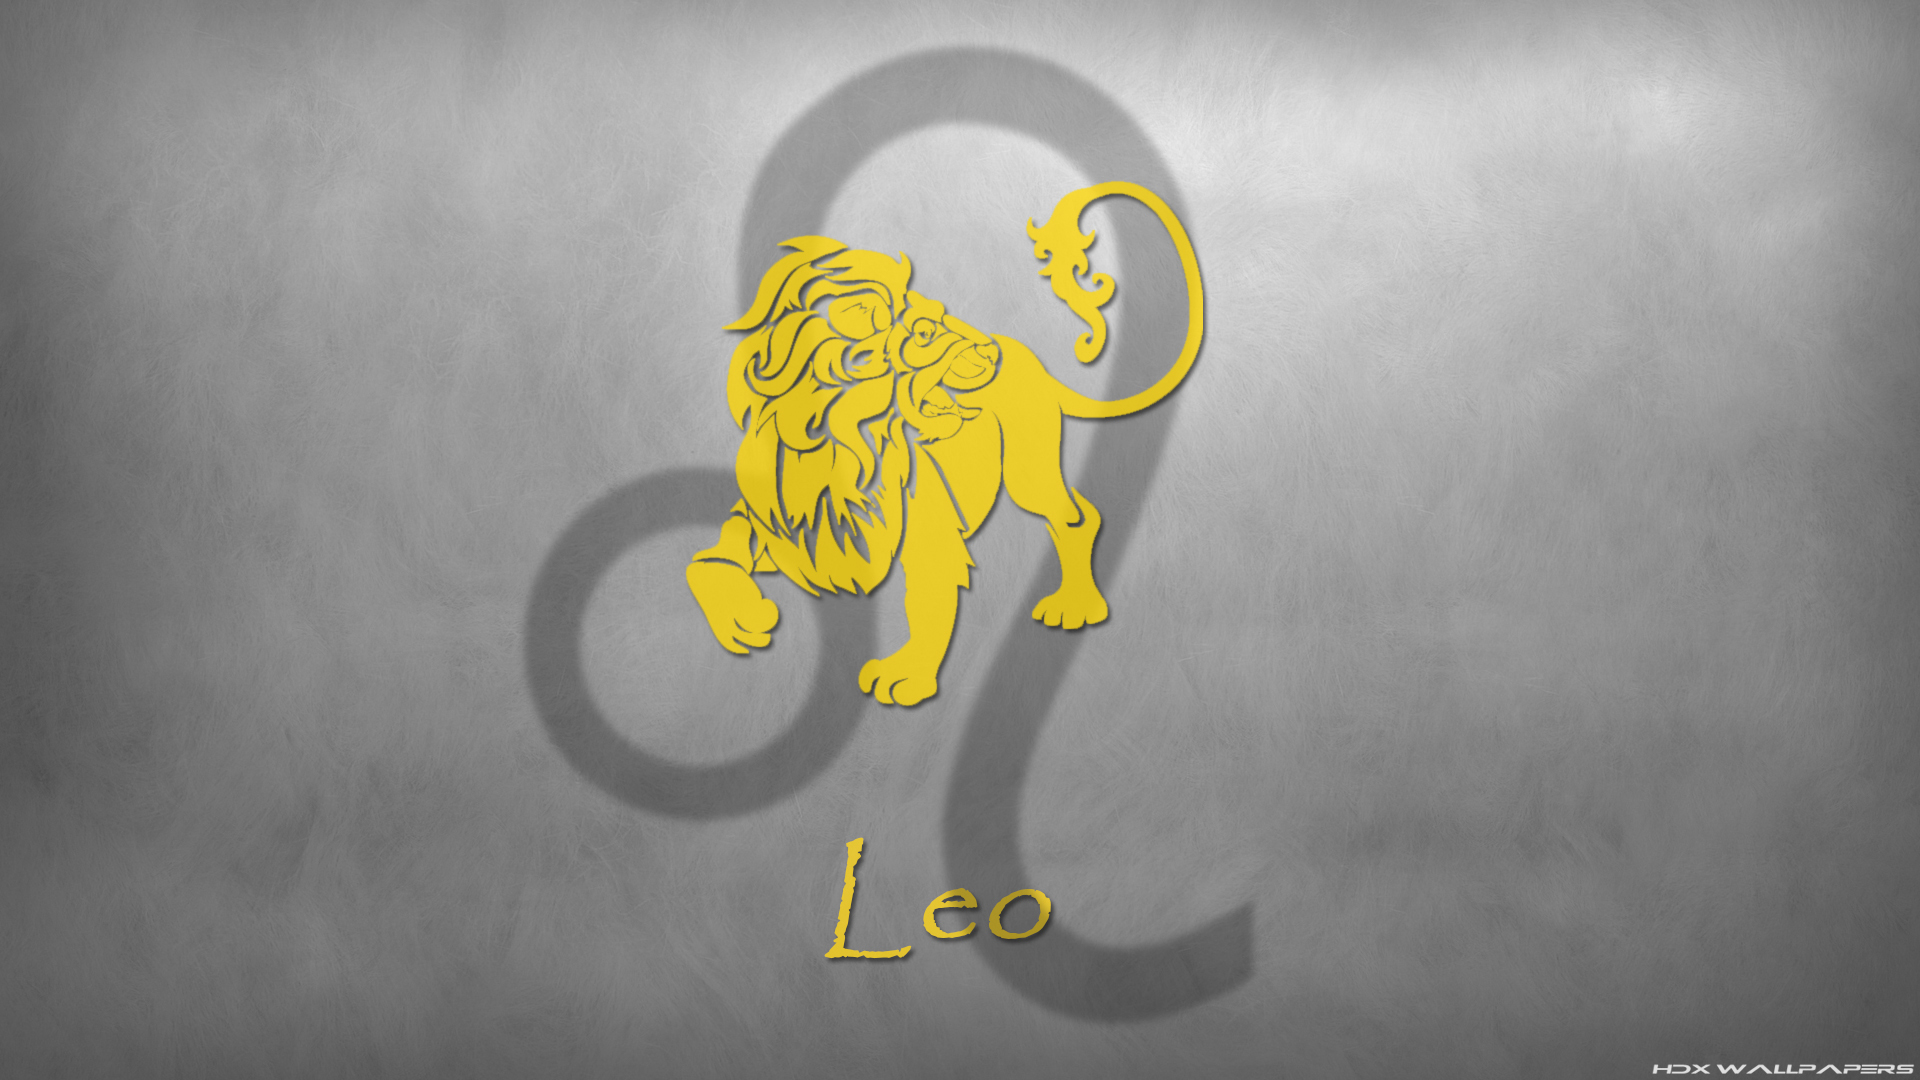 Zodiac sign Leo wallpaper and image, picture, photo